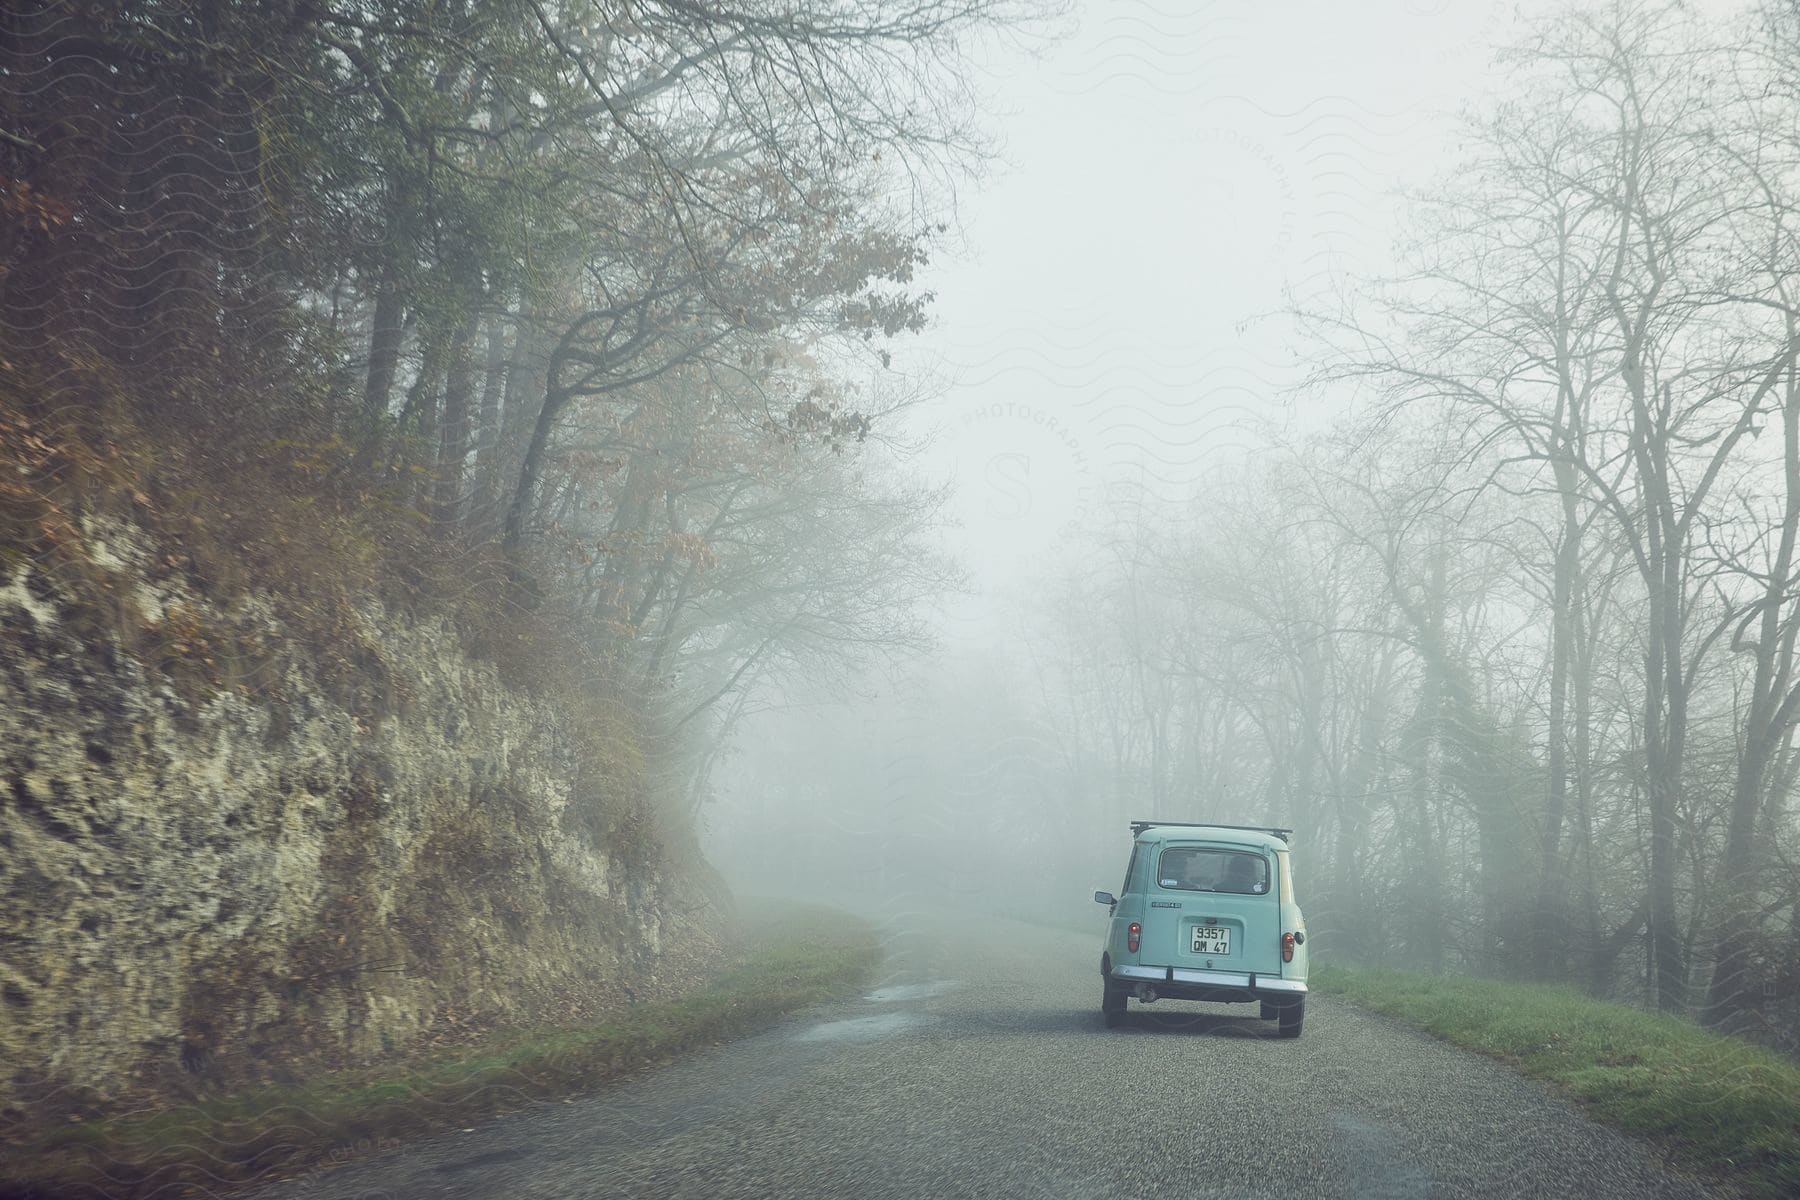 A small blue car is seen on a road surrounded by trees and fog